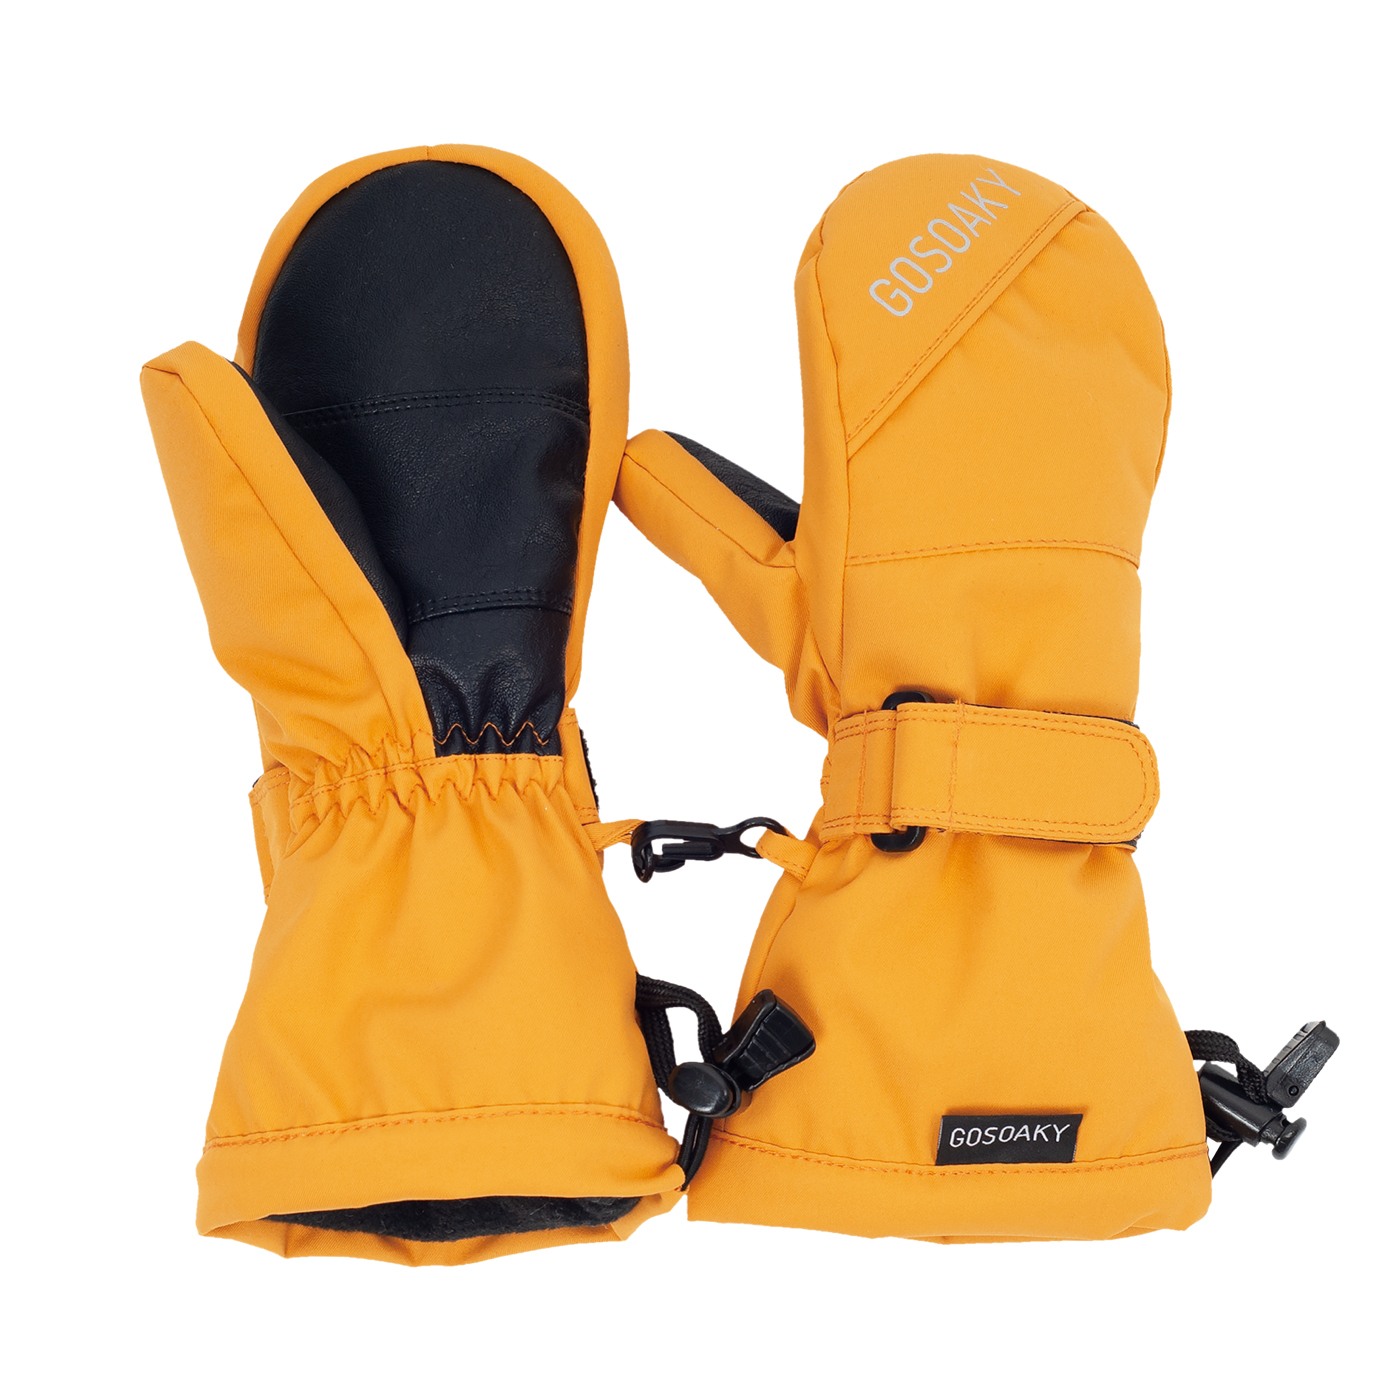 SKIING GLOVES 